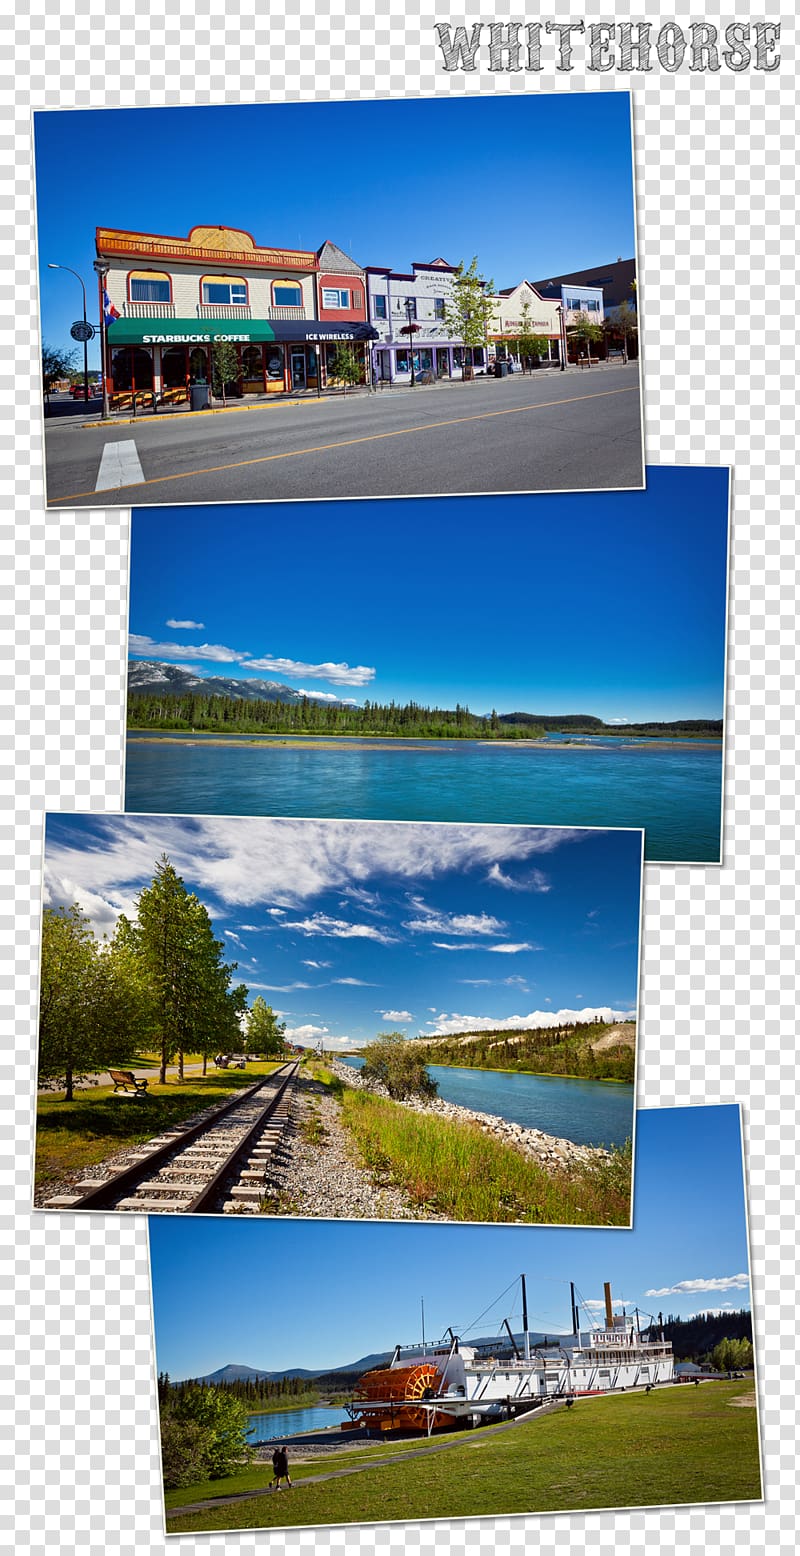 Whitehorse Dawson City Yukon River The Call of the Wild Travel, whitehorse transparent background PNG clipart